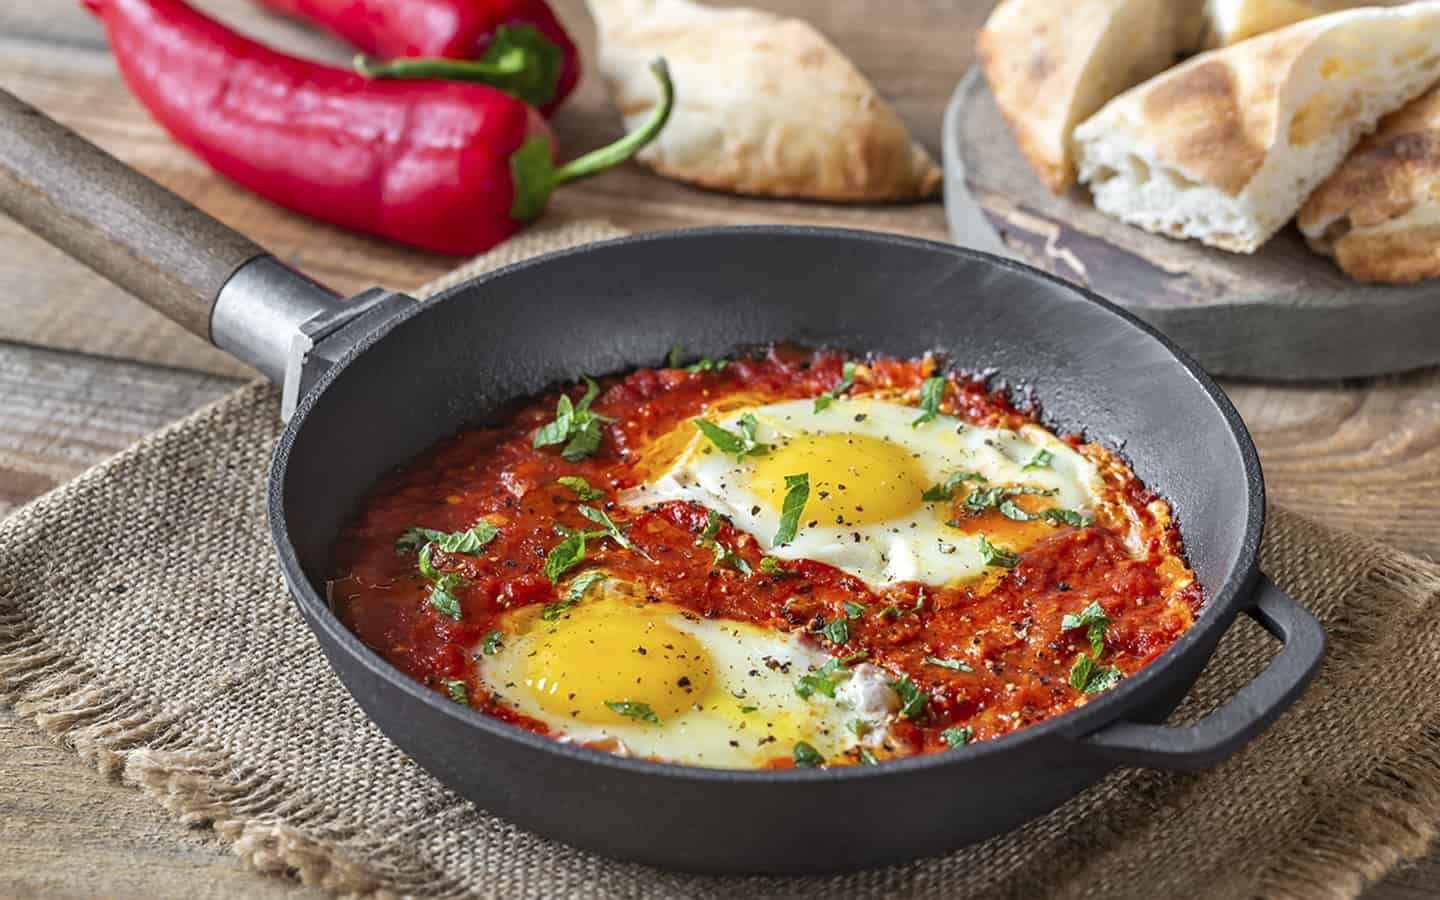 Spicing up your eggs for breakfast … or anytime